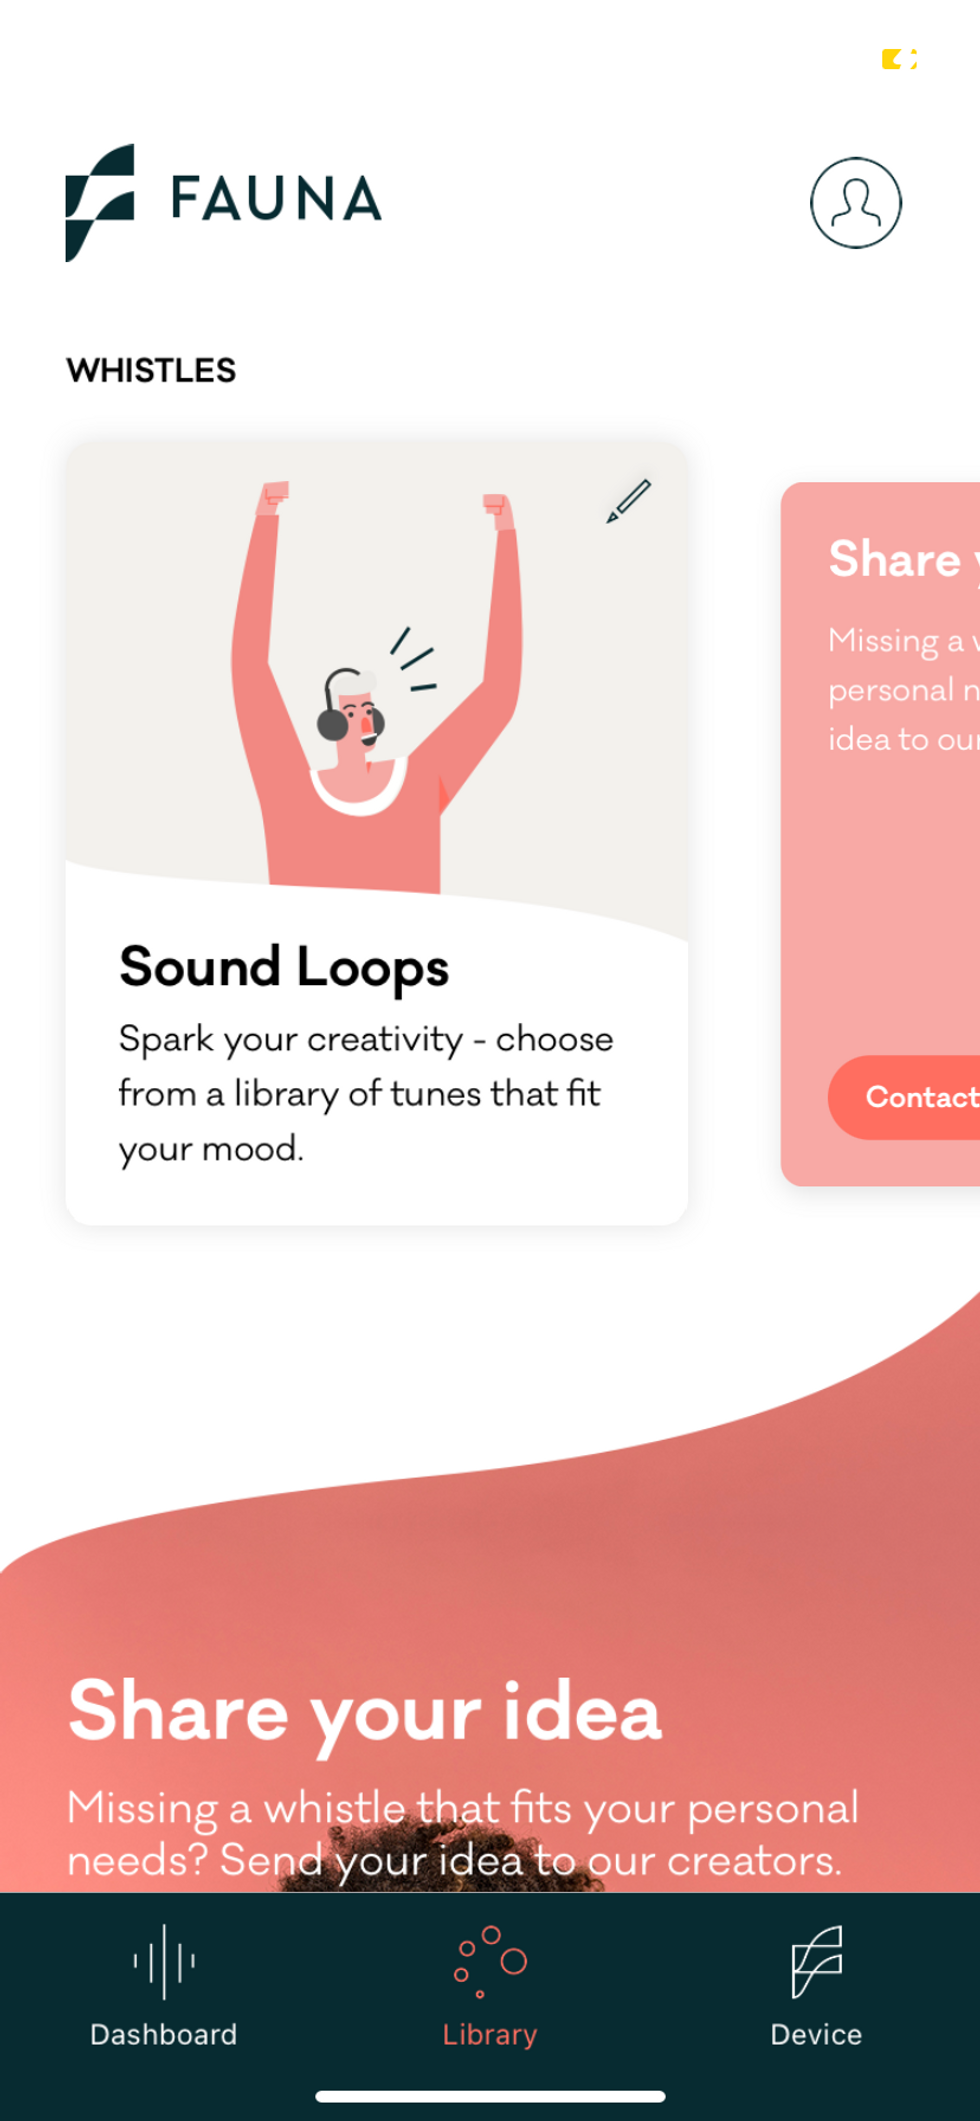 Use Fauna Sound Loops whistle to find the tunes that are right for your mood